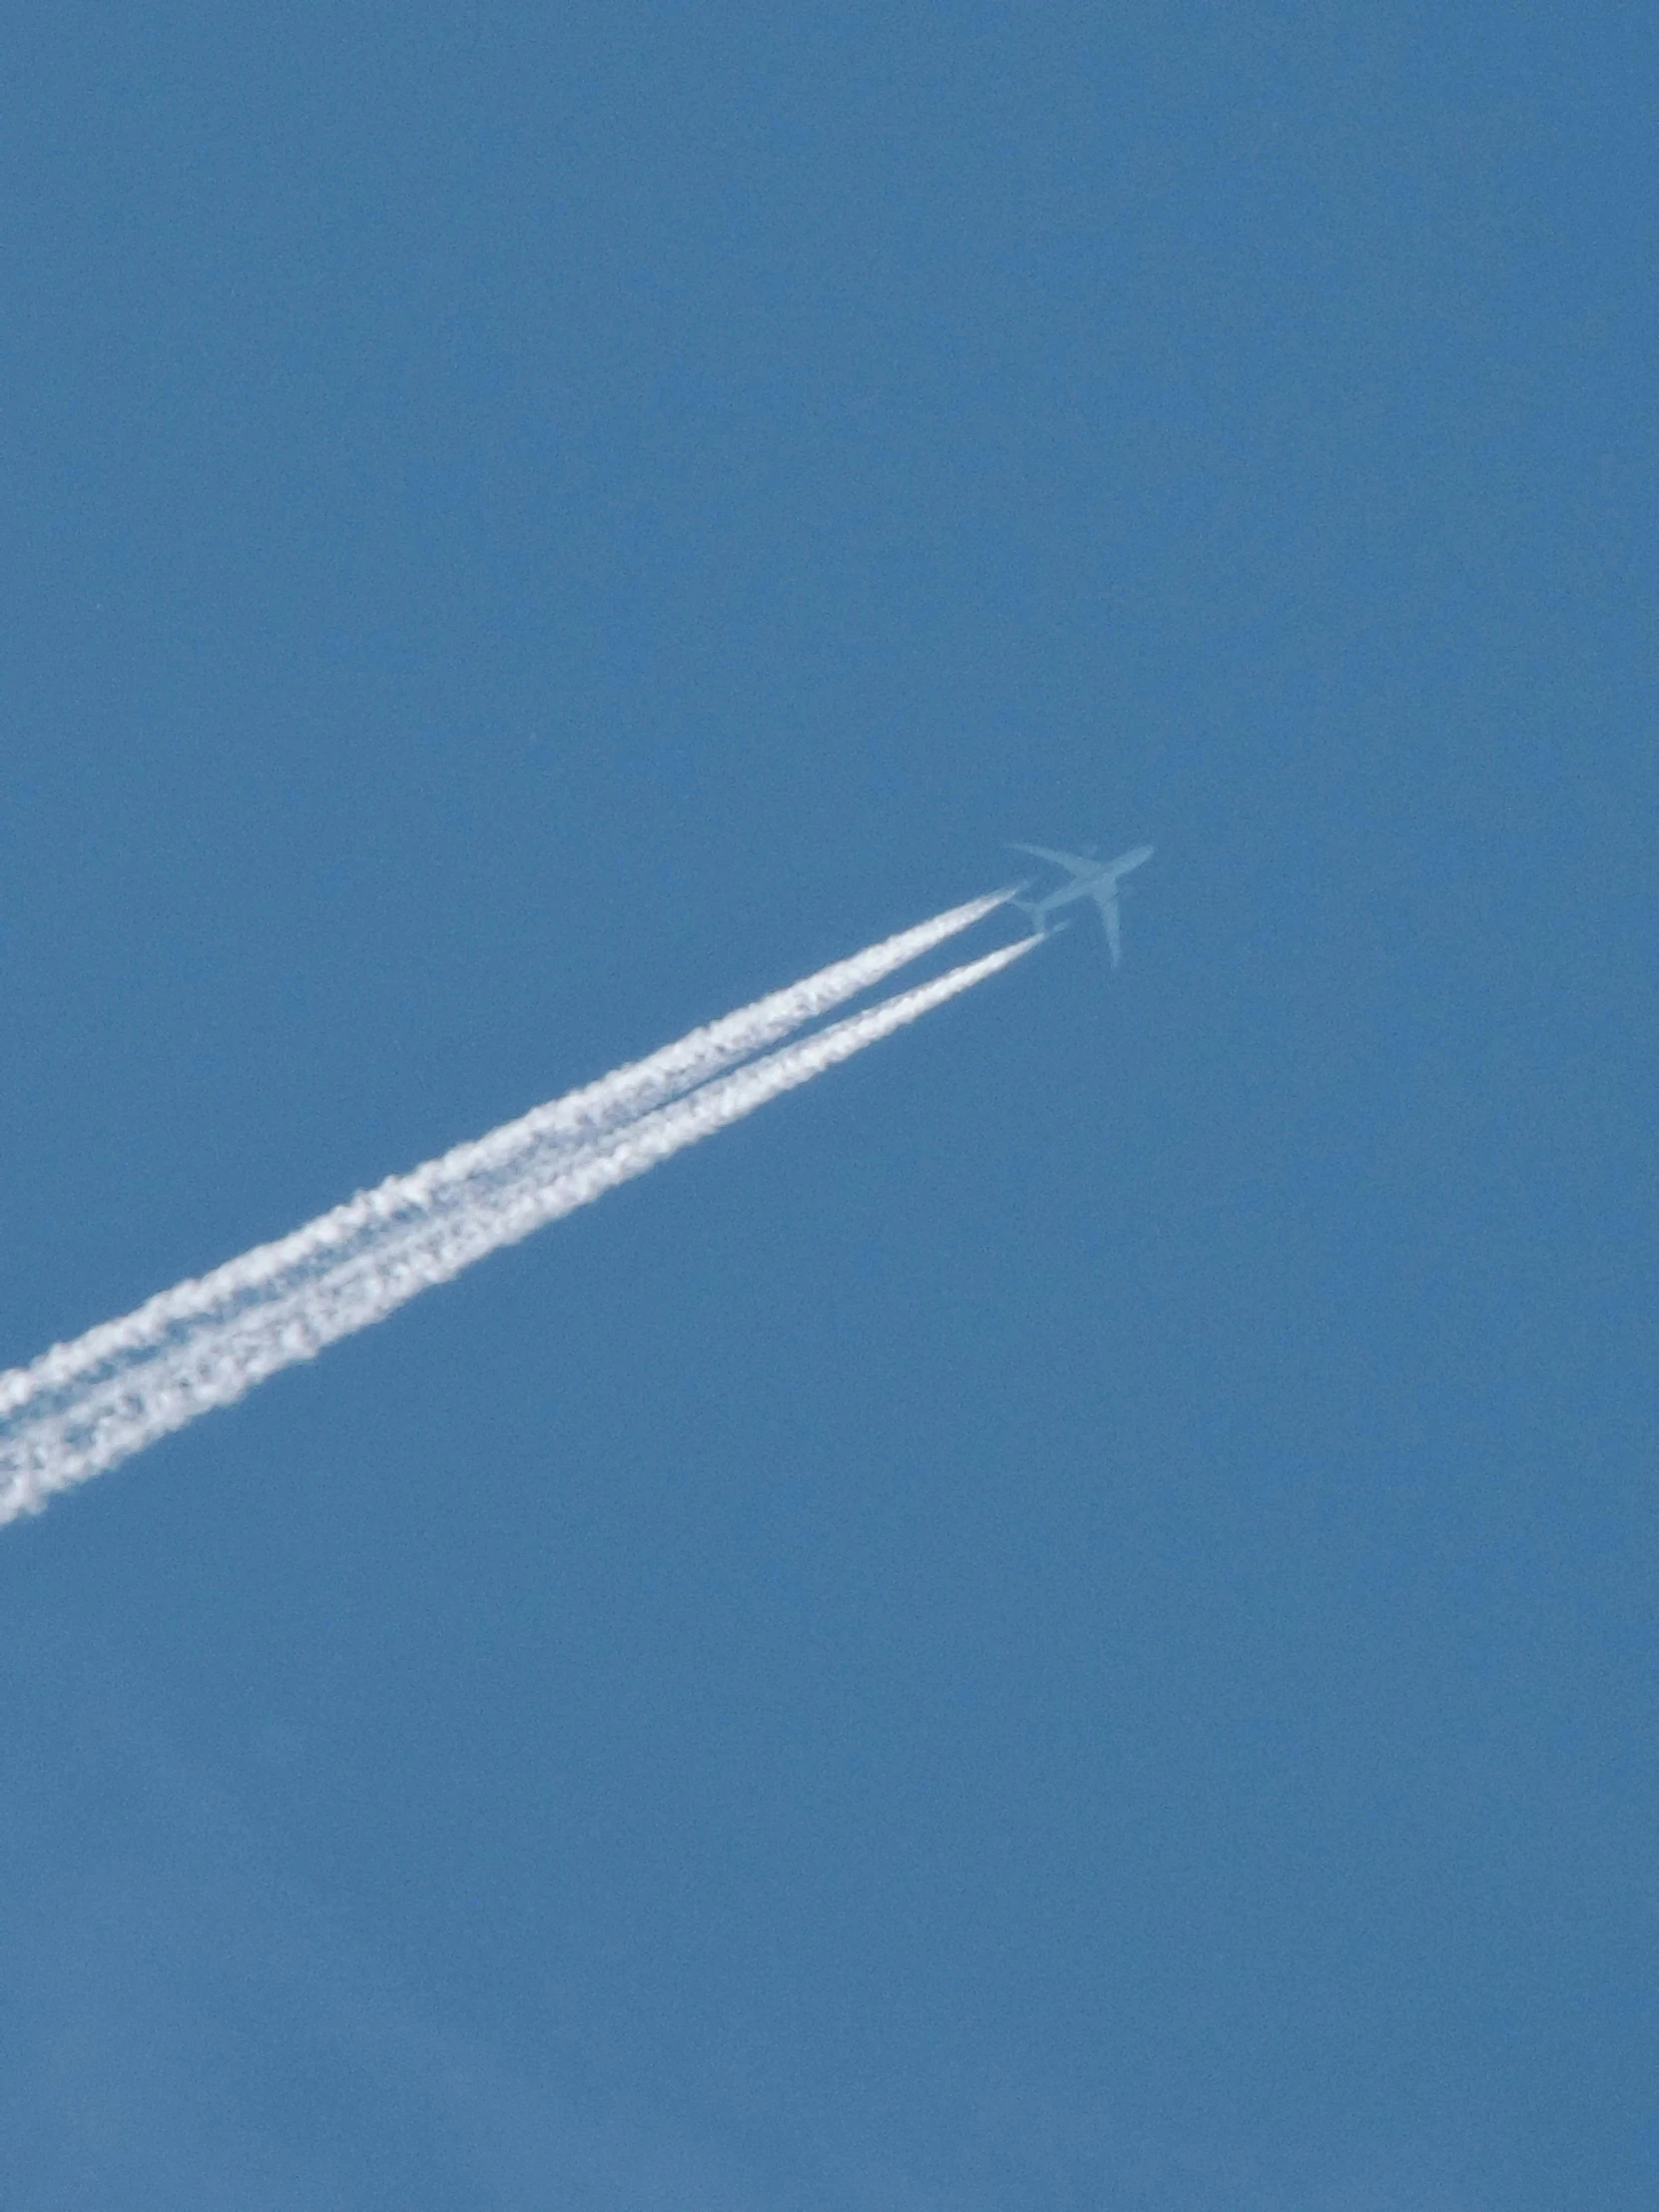 a jet with a white streak flying in the sky